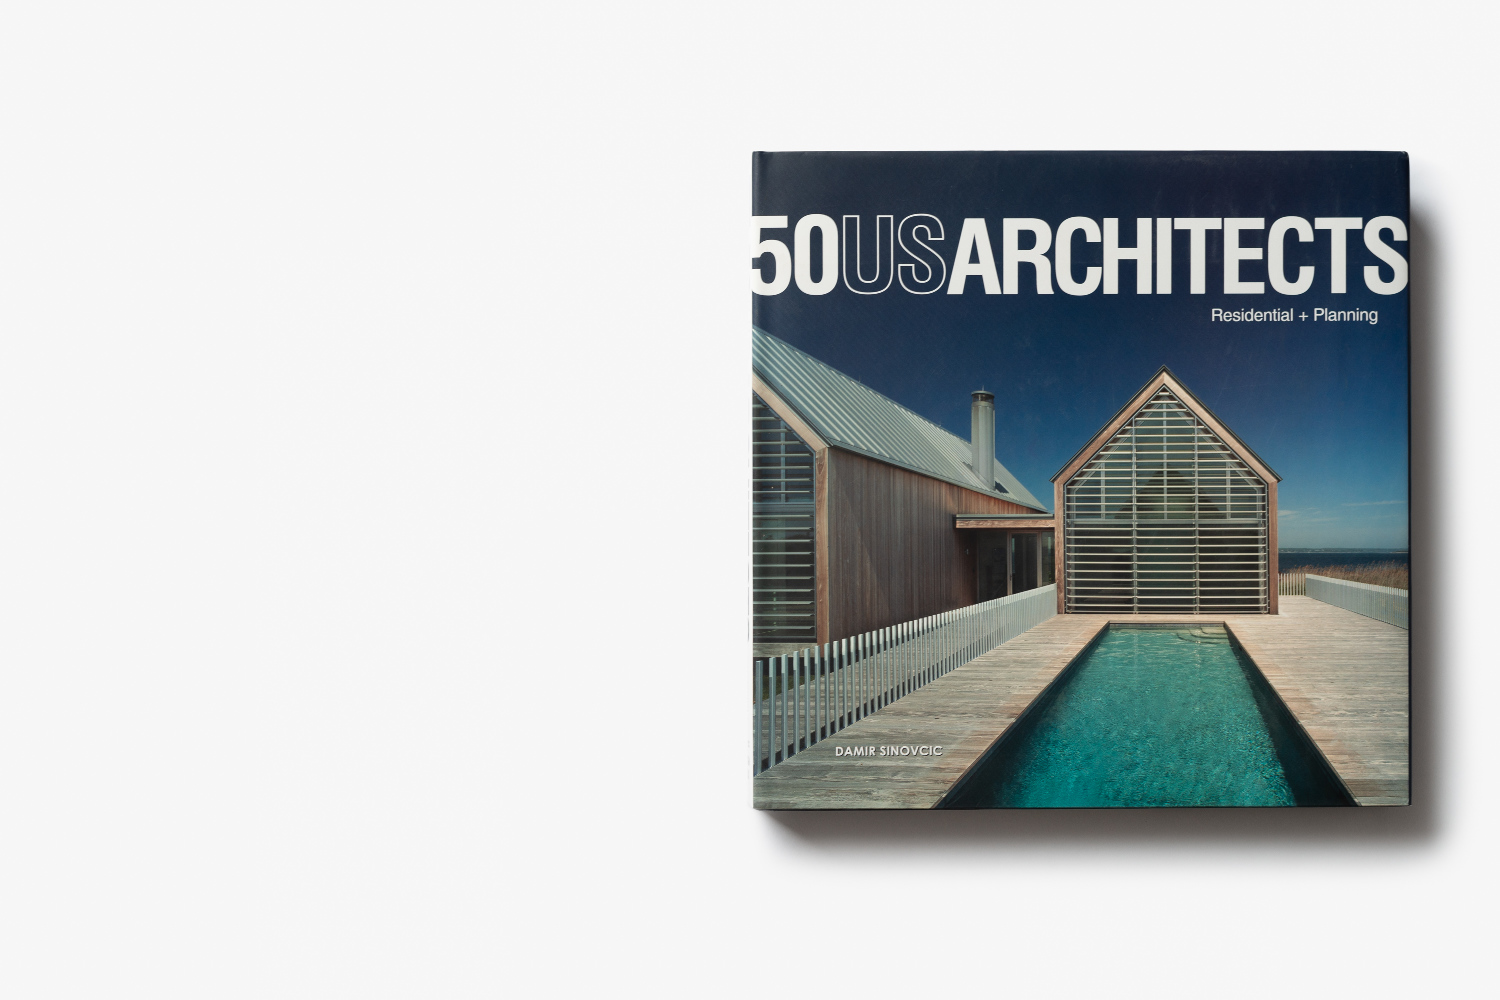 Birdseye Featured in “50 US Architects – Residential + Planning”